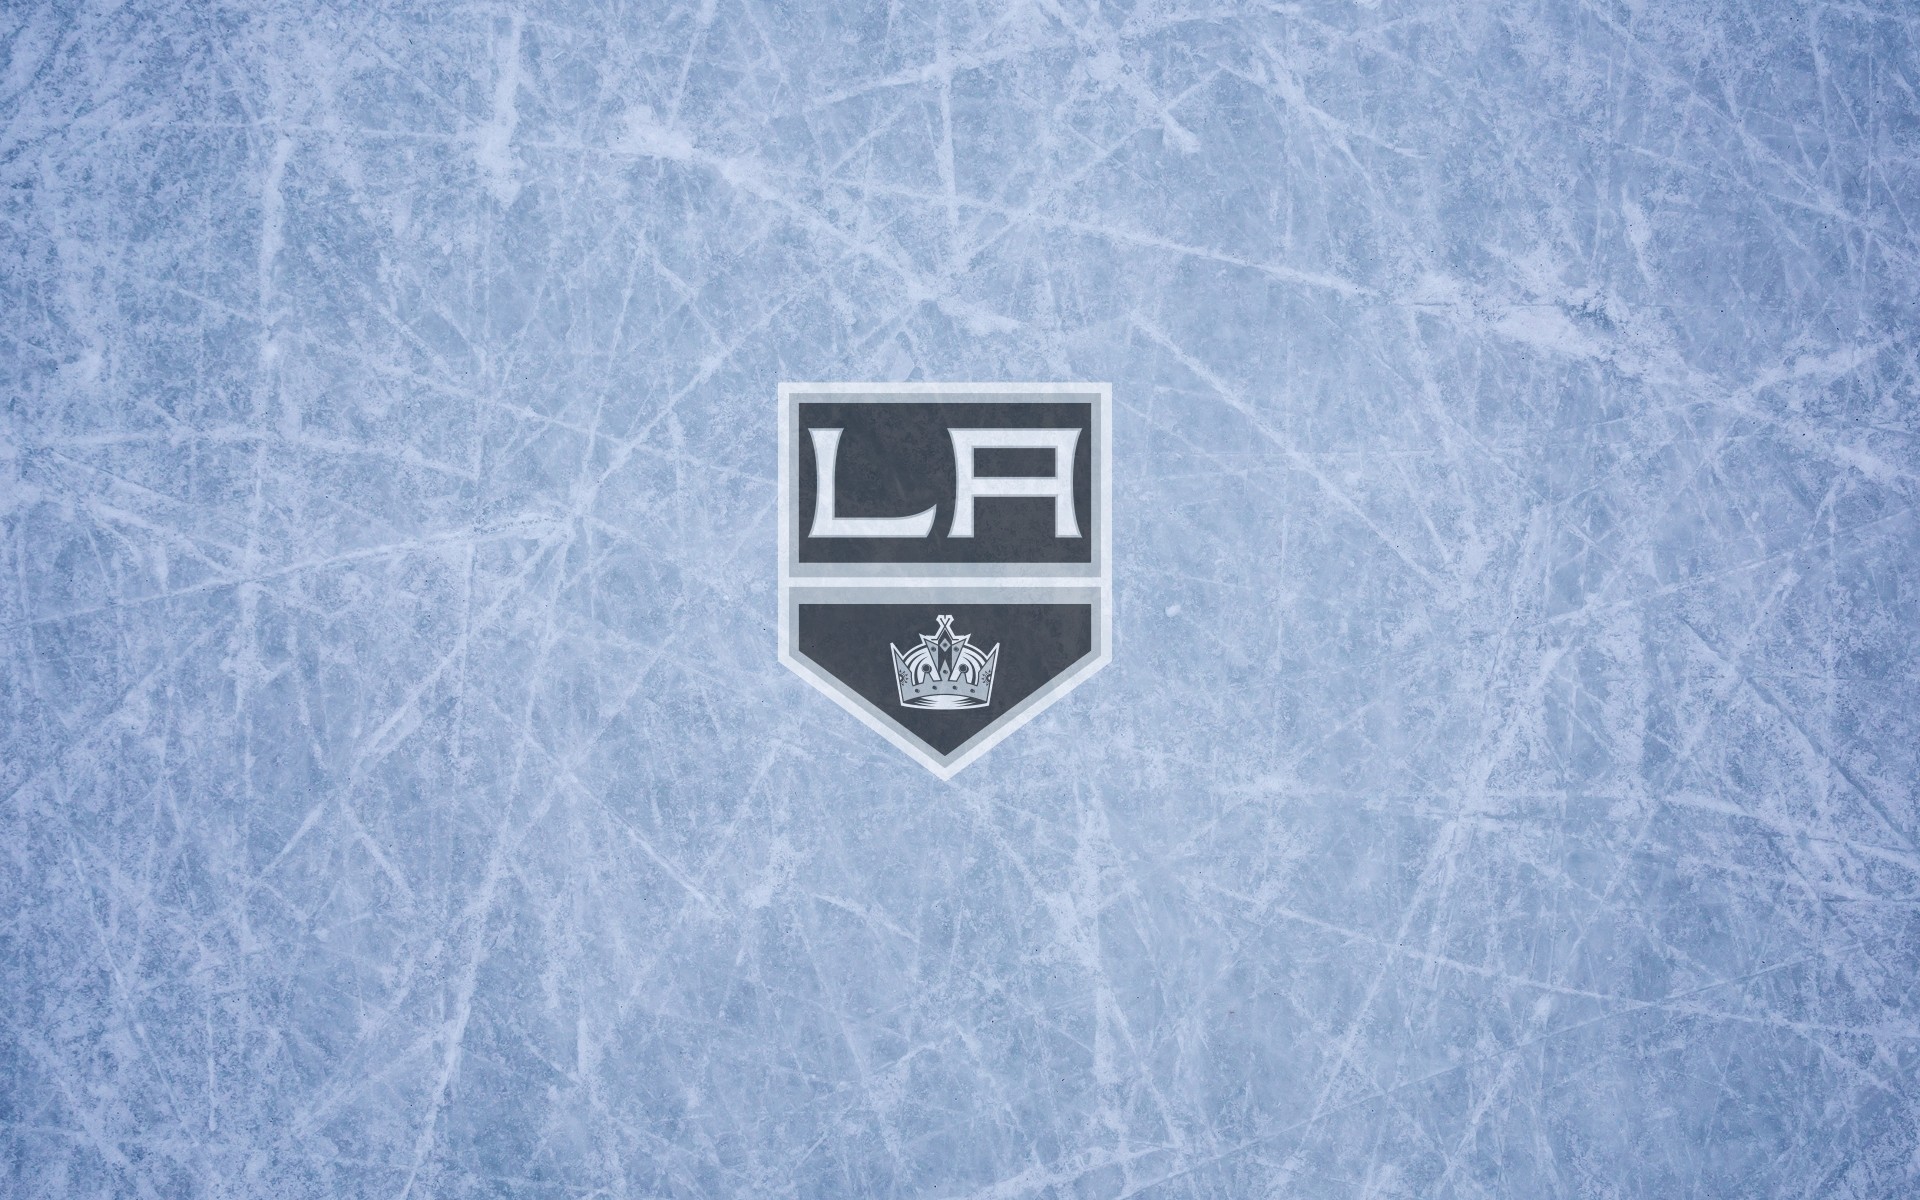 1920x1200 Los Angeles Kings wallpaper, ice and logo, widescreen , 16x10